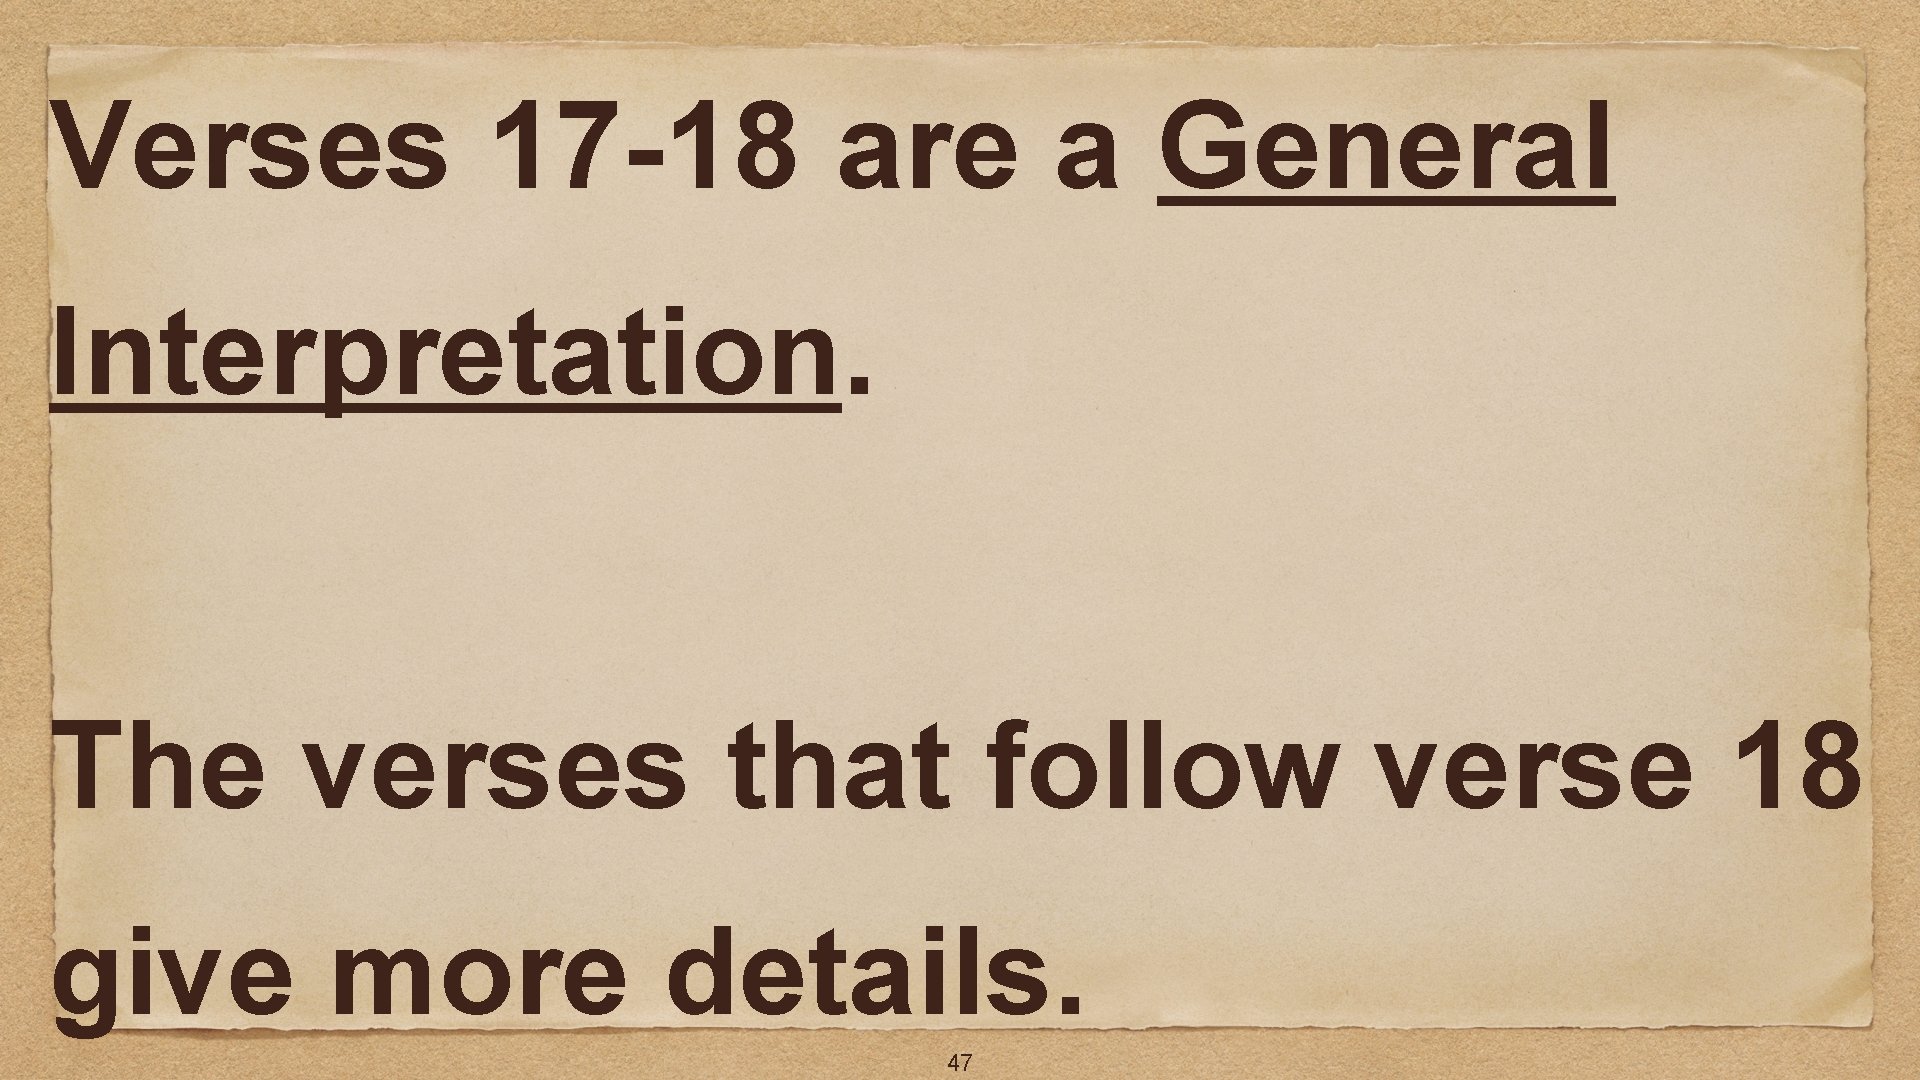 Verses 17 -18 are a General Interpretation. The verses that follow verse 18 give